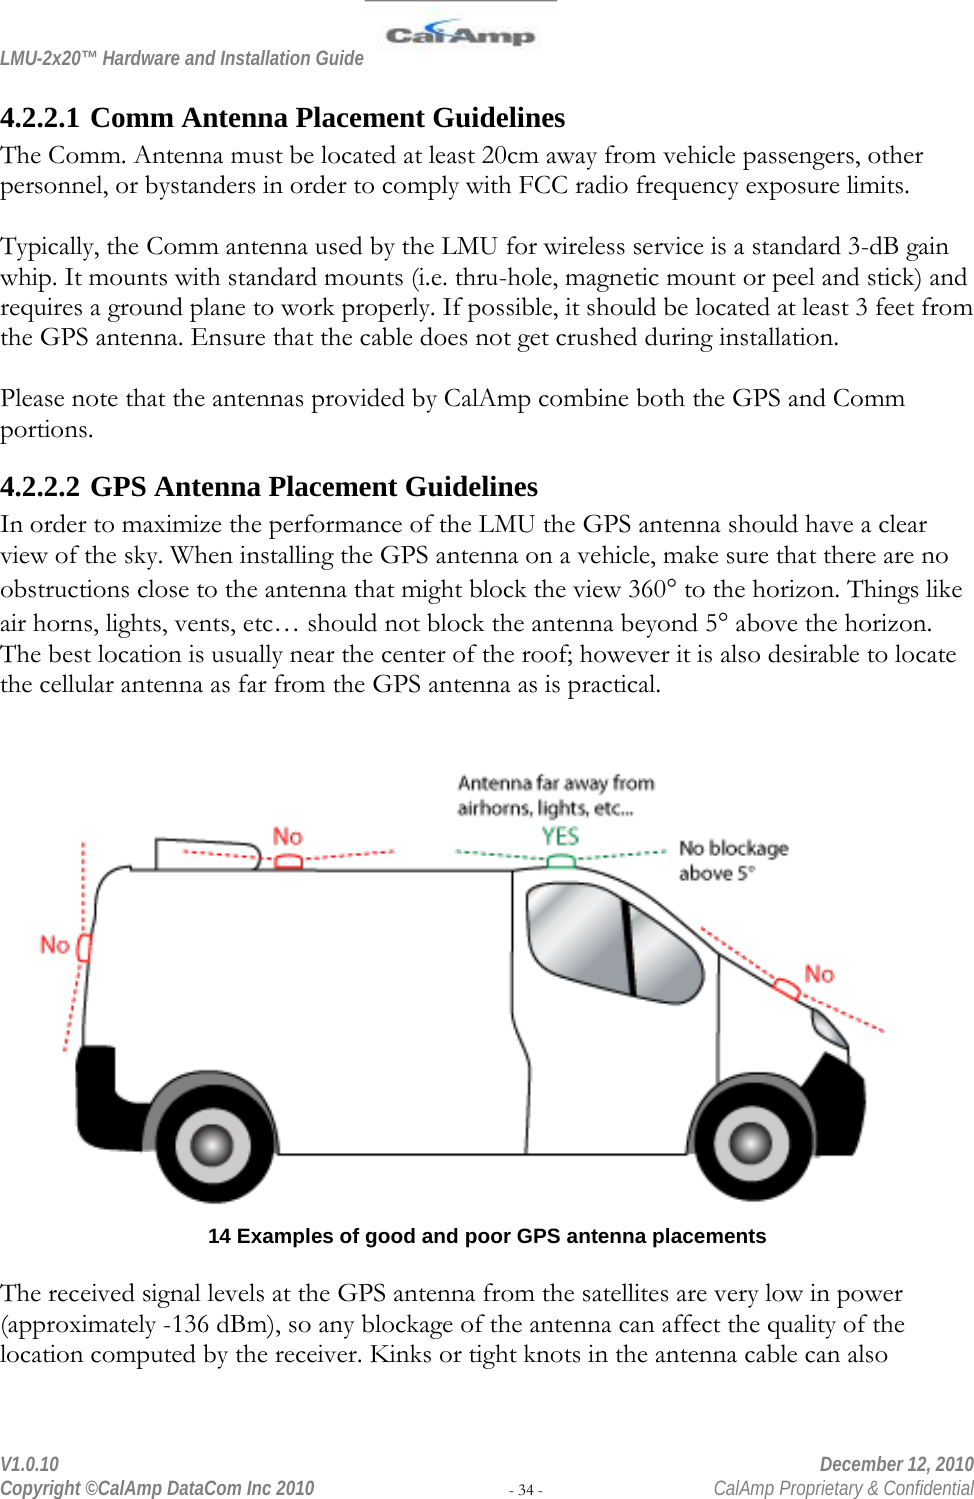 LMU-2x20™ Hardware and Installation Guide  V1.0.10    December 12, 2010 Copyright ©CalAmp DataCom Inc 2010 - 34 -  CalAmp Proprietary &amp; Confidential 4.2.2.1 Comm Antenna Placement Guidelines The Comm. Antenna must be located at least 20cm away from vehicle passengers, other personnel, or bystanders in order to comply with FCC radio frequency exposure limits.  Typically, the Comm antenna used by the LMU for wireless service is a standard 3-dB gain whip. It mounts with standard mounts (i.e. thru-hole, magnetic mount or peel and stick) and requires a ground plane to work properly. If possible, it should be located at least 3 feet from the GPS antenna. Ensure that the cable does not get crushed during installation.  Please note that the antennas provided by CalAmp combine both the GPS and Comm portions. 4.2.2.2 GPS Antenna Placement Guidelines In order to maximize the performance of the LMU the GPS antenna should have a clear view of the sky. When installing the GPS antenna on a vehicle, make sure that there are no obstructions close to the antenna that might block the view 360° to the horizon. Things like air horns, lights, vents, etc… should not block the antenna beyond 5° above the horizon. The best location is usually near the center of the roof; however it is also desirable to locate the cellular antenna as far from the GPS antenna as is practical.   14 Examples of good and poor GPS antenna placements  The received signal levels at the GPS antenna from the satellites are very low in power (approximately -136 dBm), so any blockage of the antenna can affect the quality of the location computed by the receiver. Kinks or tight knots in the antenna cable can also 